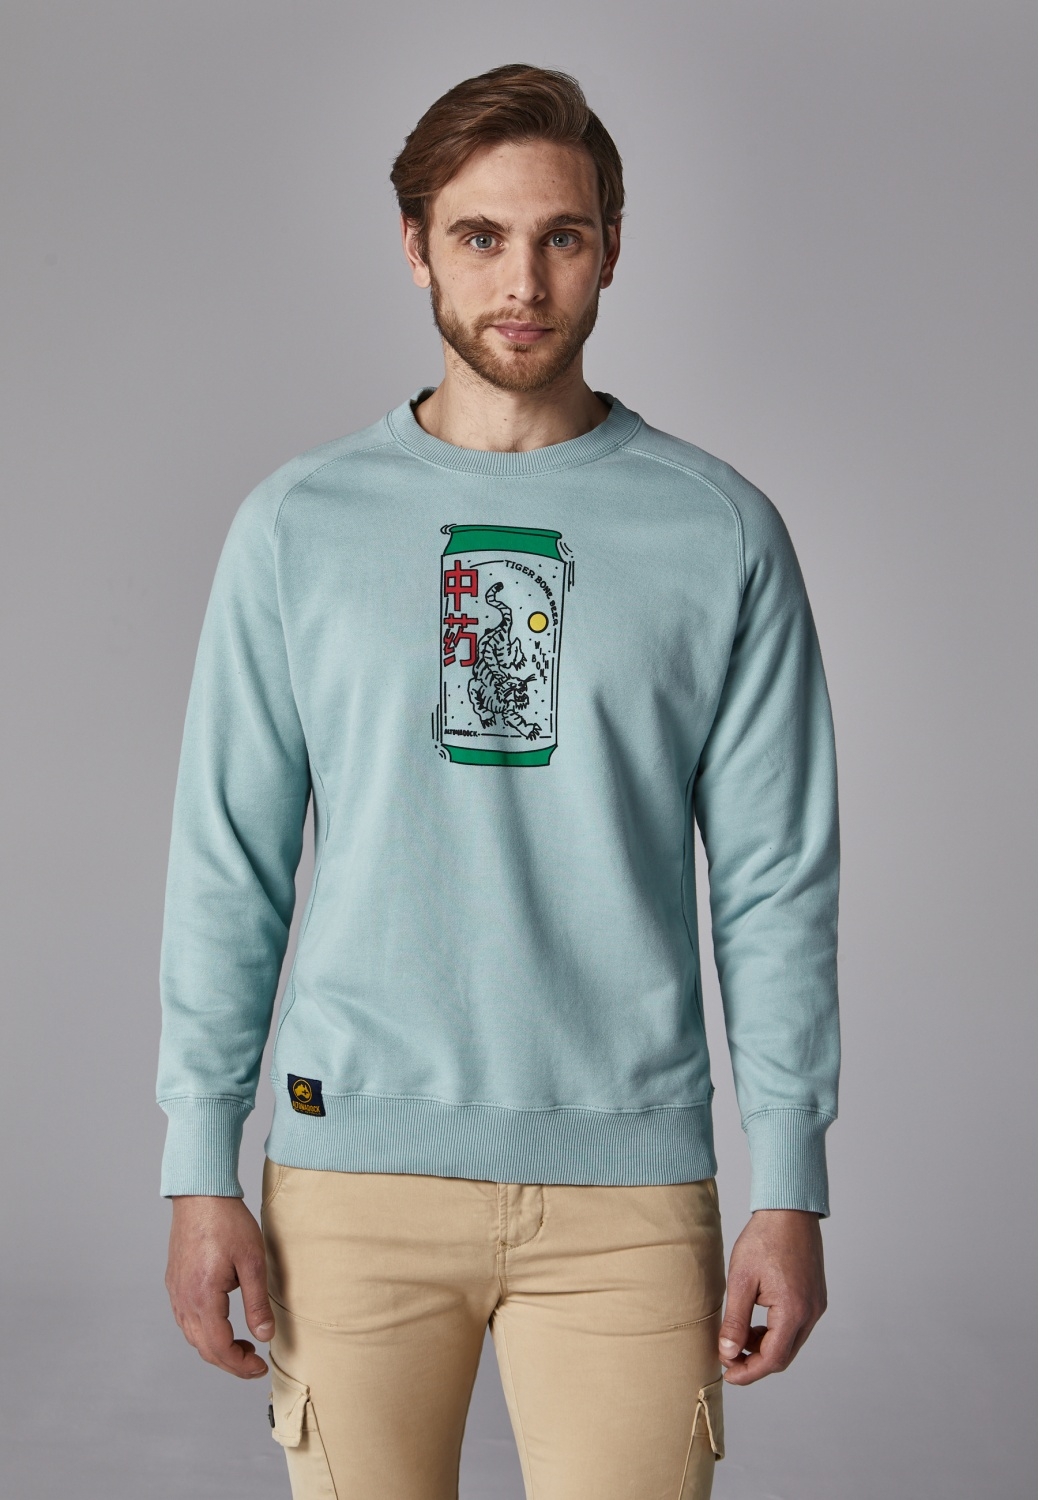 BLUE SWEATSHIRT WITH CAN PRINT